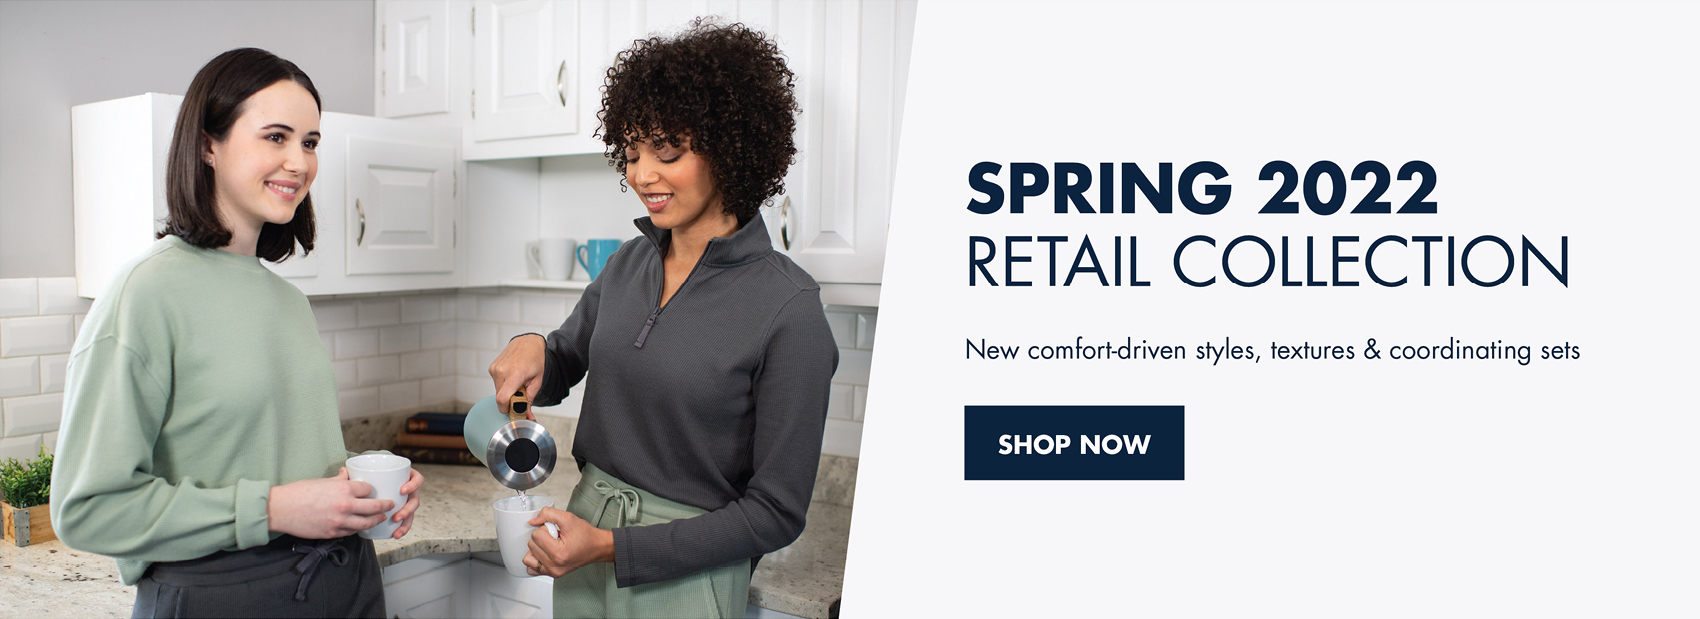 Spring 2022 Retail Collection: New comfort-driven styles, textures & coordinating sets - Shop Now!